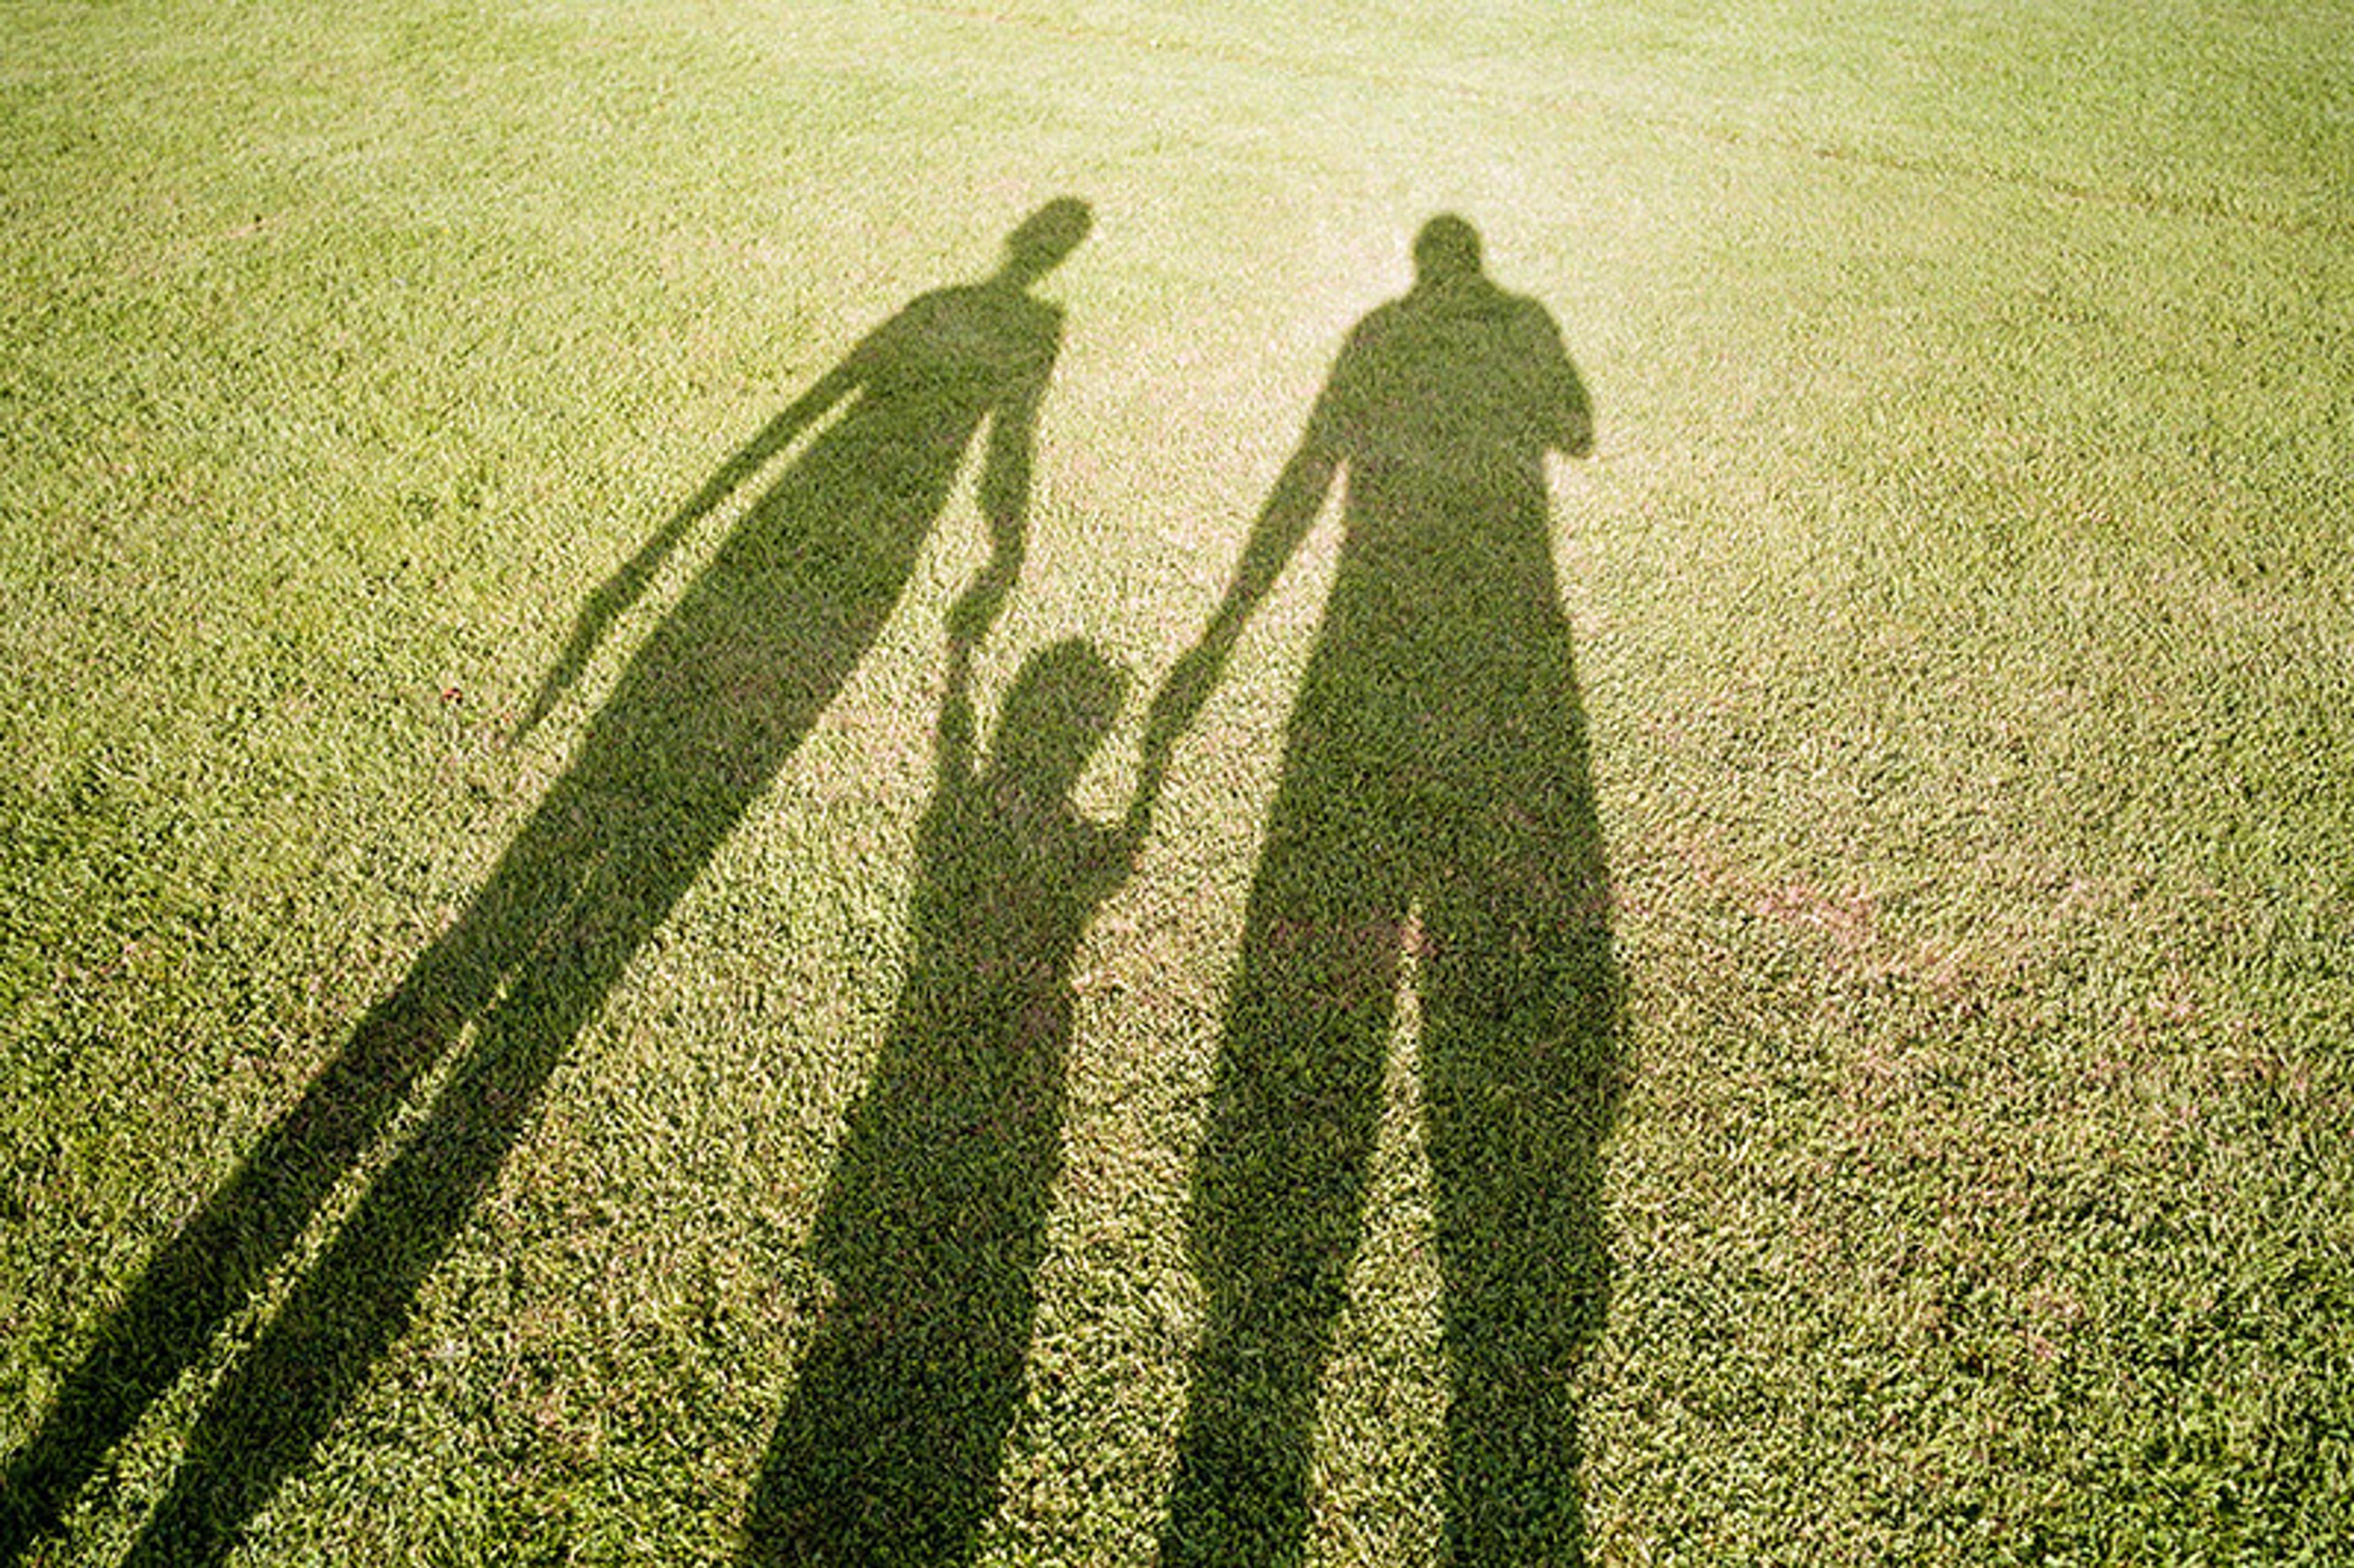 The lengthened shadow of two adults each holding a child’s hand is seen on a lawn